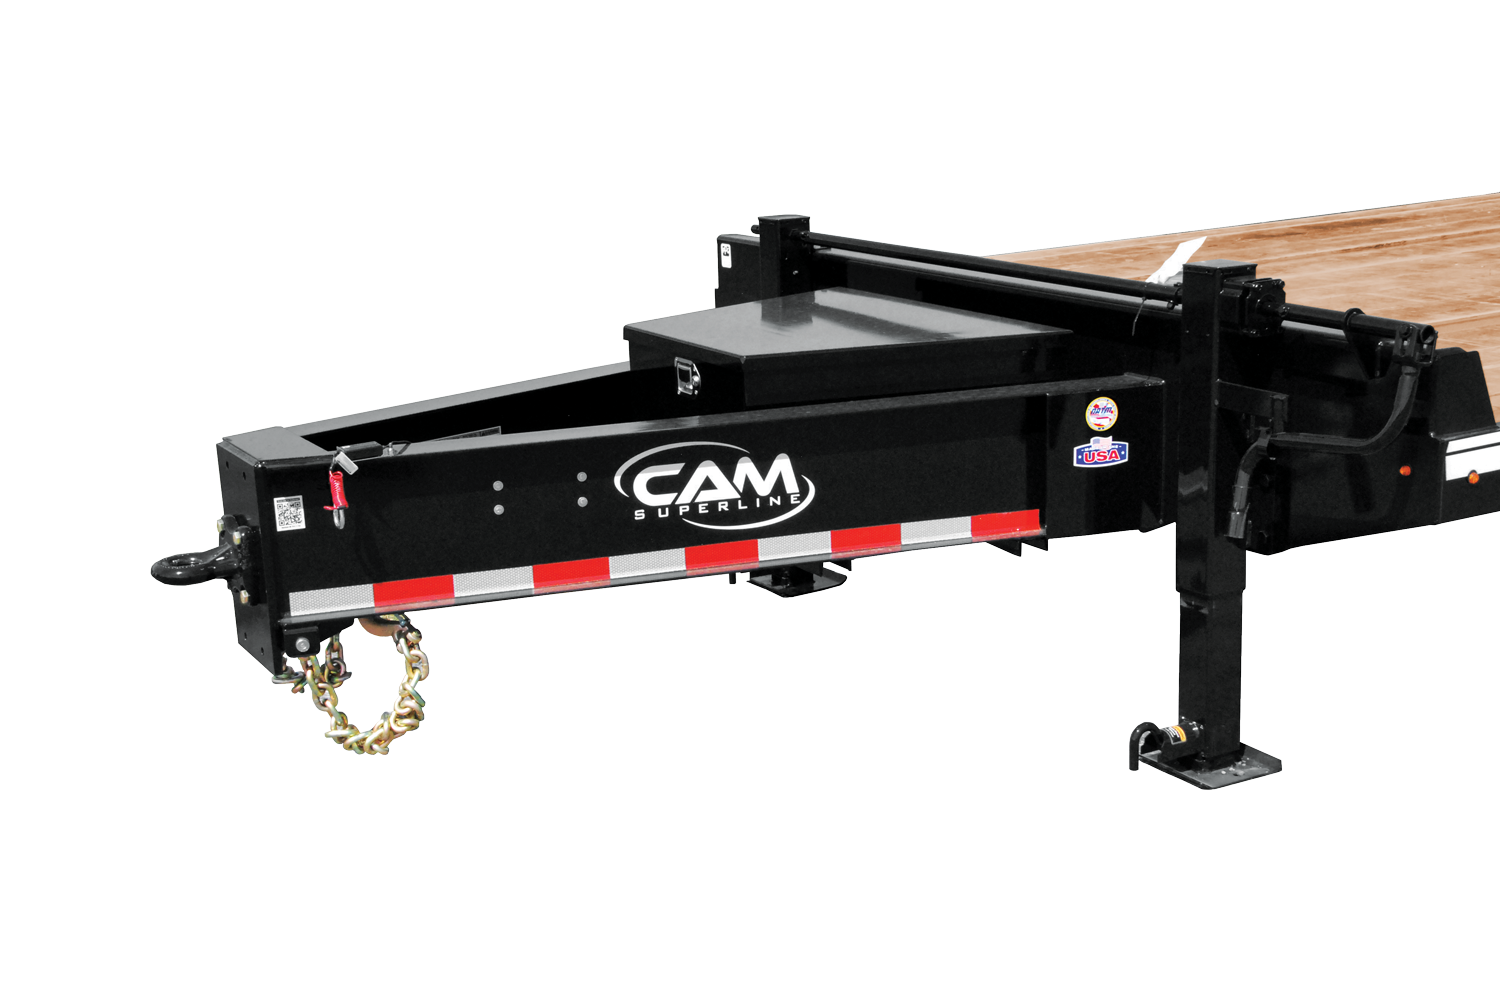 Cam Superline | The BEAST Deckover Trailer | Image | Front side of The BEAST Deckover Trailer with reflective tape, close-up of Tongue, with chain